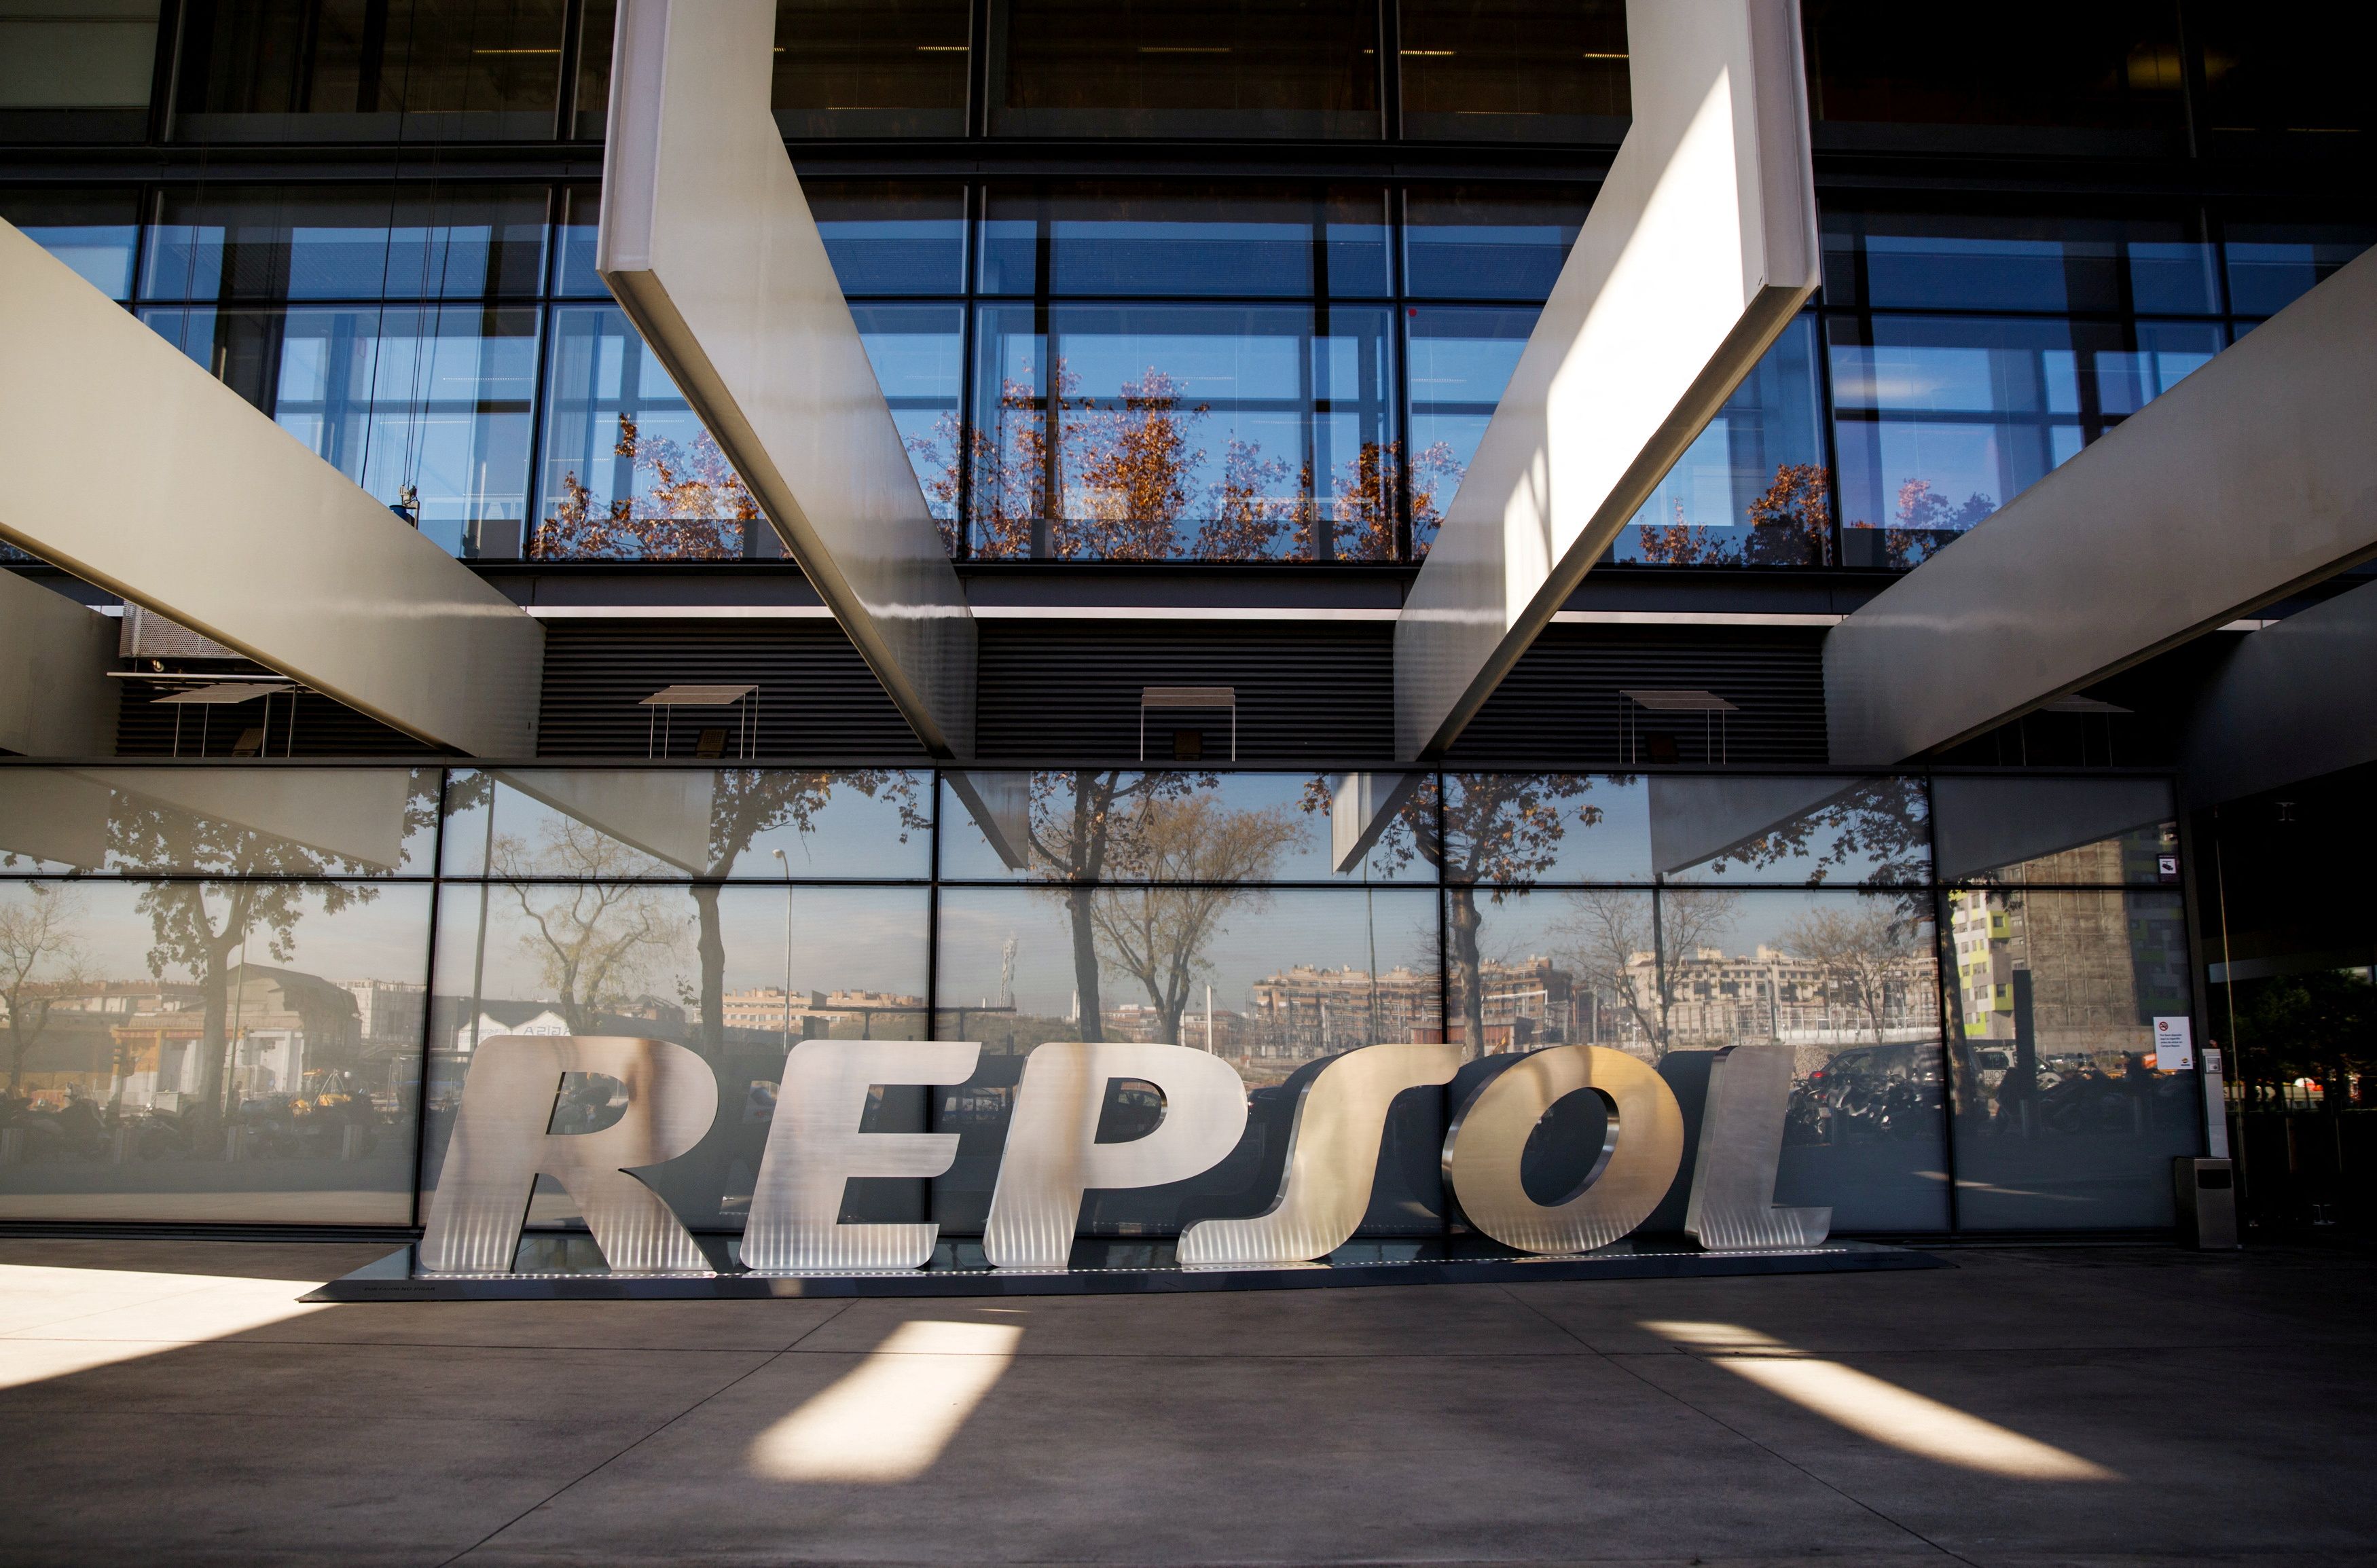 The Repsol logo outside their headquarters in Madrid